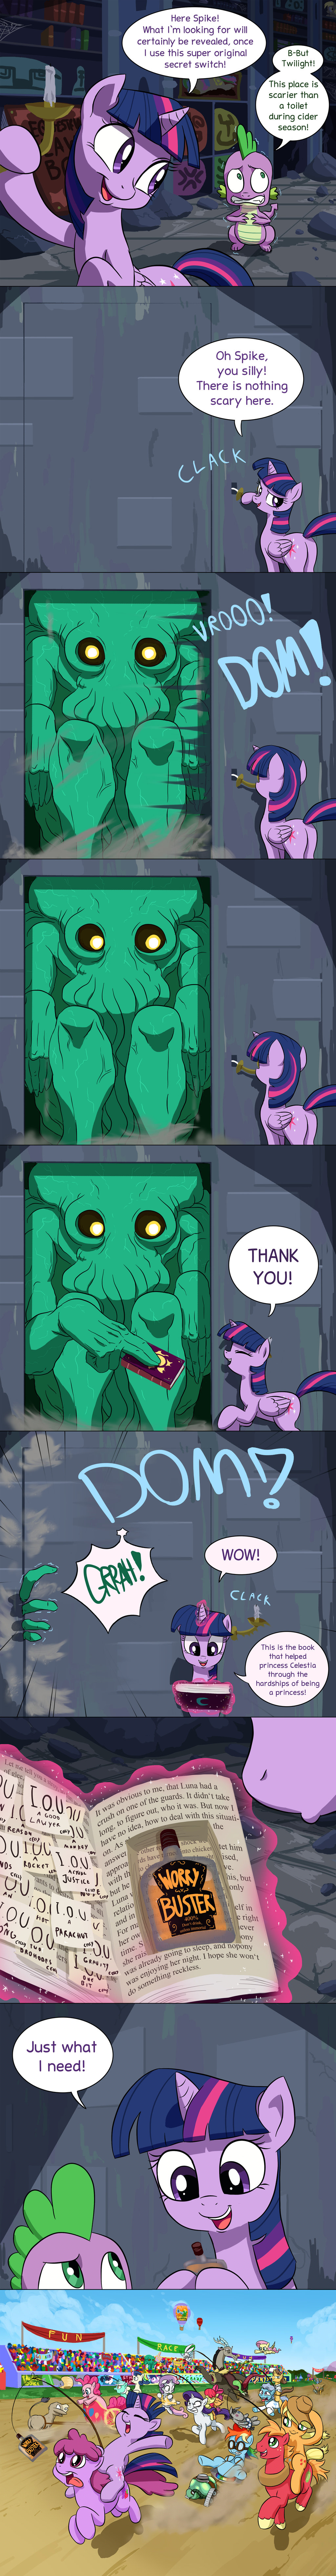 aircraft alcohol amber_eyes angel_(mlp) apple_bloom_(mlp) applejack_(mlp) bear berry_punch_(mlp) beverage big_macintosh_(mlp) bigger_version_at_the_source blonde_hair blue_eyes blue_hair bonbon_(mlp) book bookshelf candle castle comic cranky_doodle_donkey_(mlp) crossover cthulhu cthulhu_mythos cup cutie_mark cutie_mark_crusaders_(mlp) dialog discord_(mlp) doctor_stable_(mlp) dog_biscuit doublewbrothers draconequus dragon english_text equine eyewear fabric female finger fluttershy_(mlp) flying foam freckles friendship_is_magic glasses gloves glowing goggles green_eyes green_hair h.p._lovecraft hair horn horse hot_air_balloon lever levitation library lyra_(mlp) lyra_heartstrings_(mlp) magic male mammal multi-colored_hair my_little_pony pegasus pink_hair pinkie_pie_(mlp) pony purple_eyes purple_hair race rainbow_dash_(mlp) rainbow_hair rarity_(mlp) rubble scared scootaloo_(mlp) screw_loose_(mlp) smartypants_(mlp) snails_(mlp) snips_(mlp) spike_(mlp) stick string sweetie_belle_(mlp) tank text treads trixie_(mlp) twilight_sparkle_(mlp) two_tone_hair unicorn whiskey white_hair winged_unicorn wings